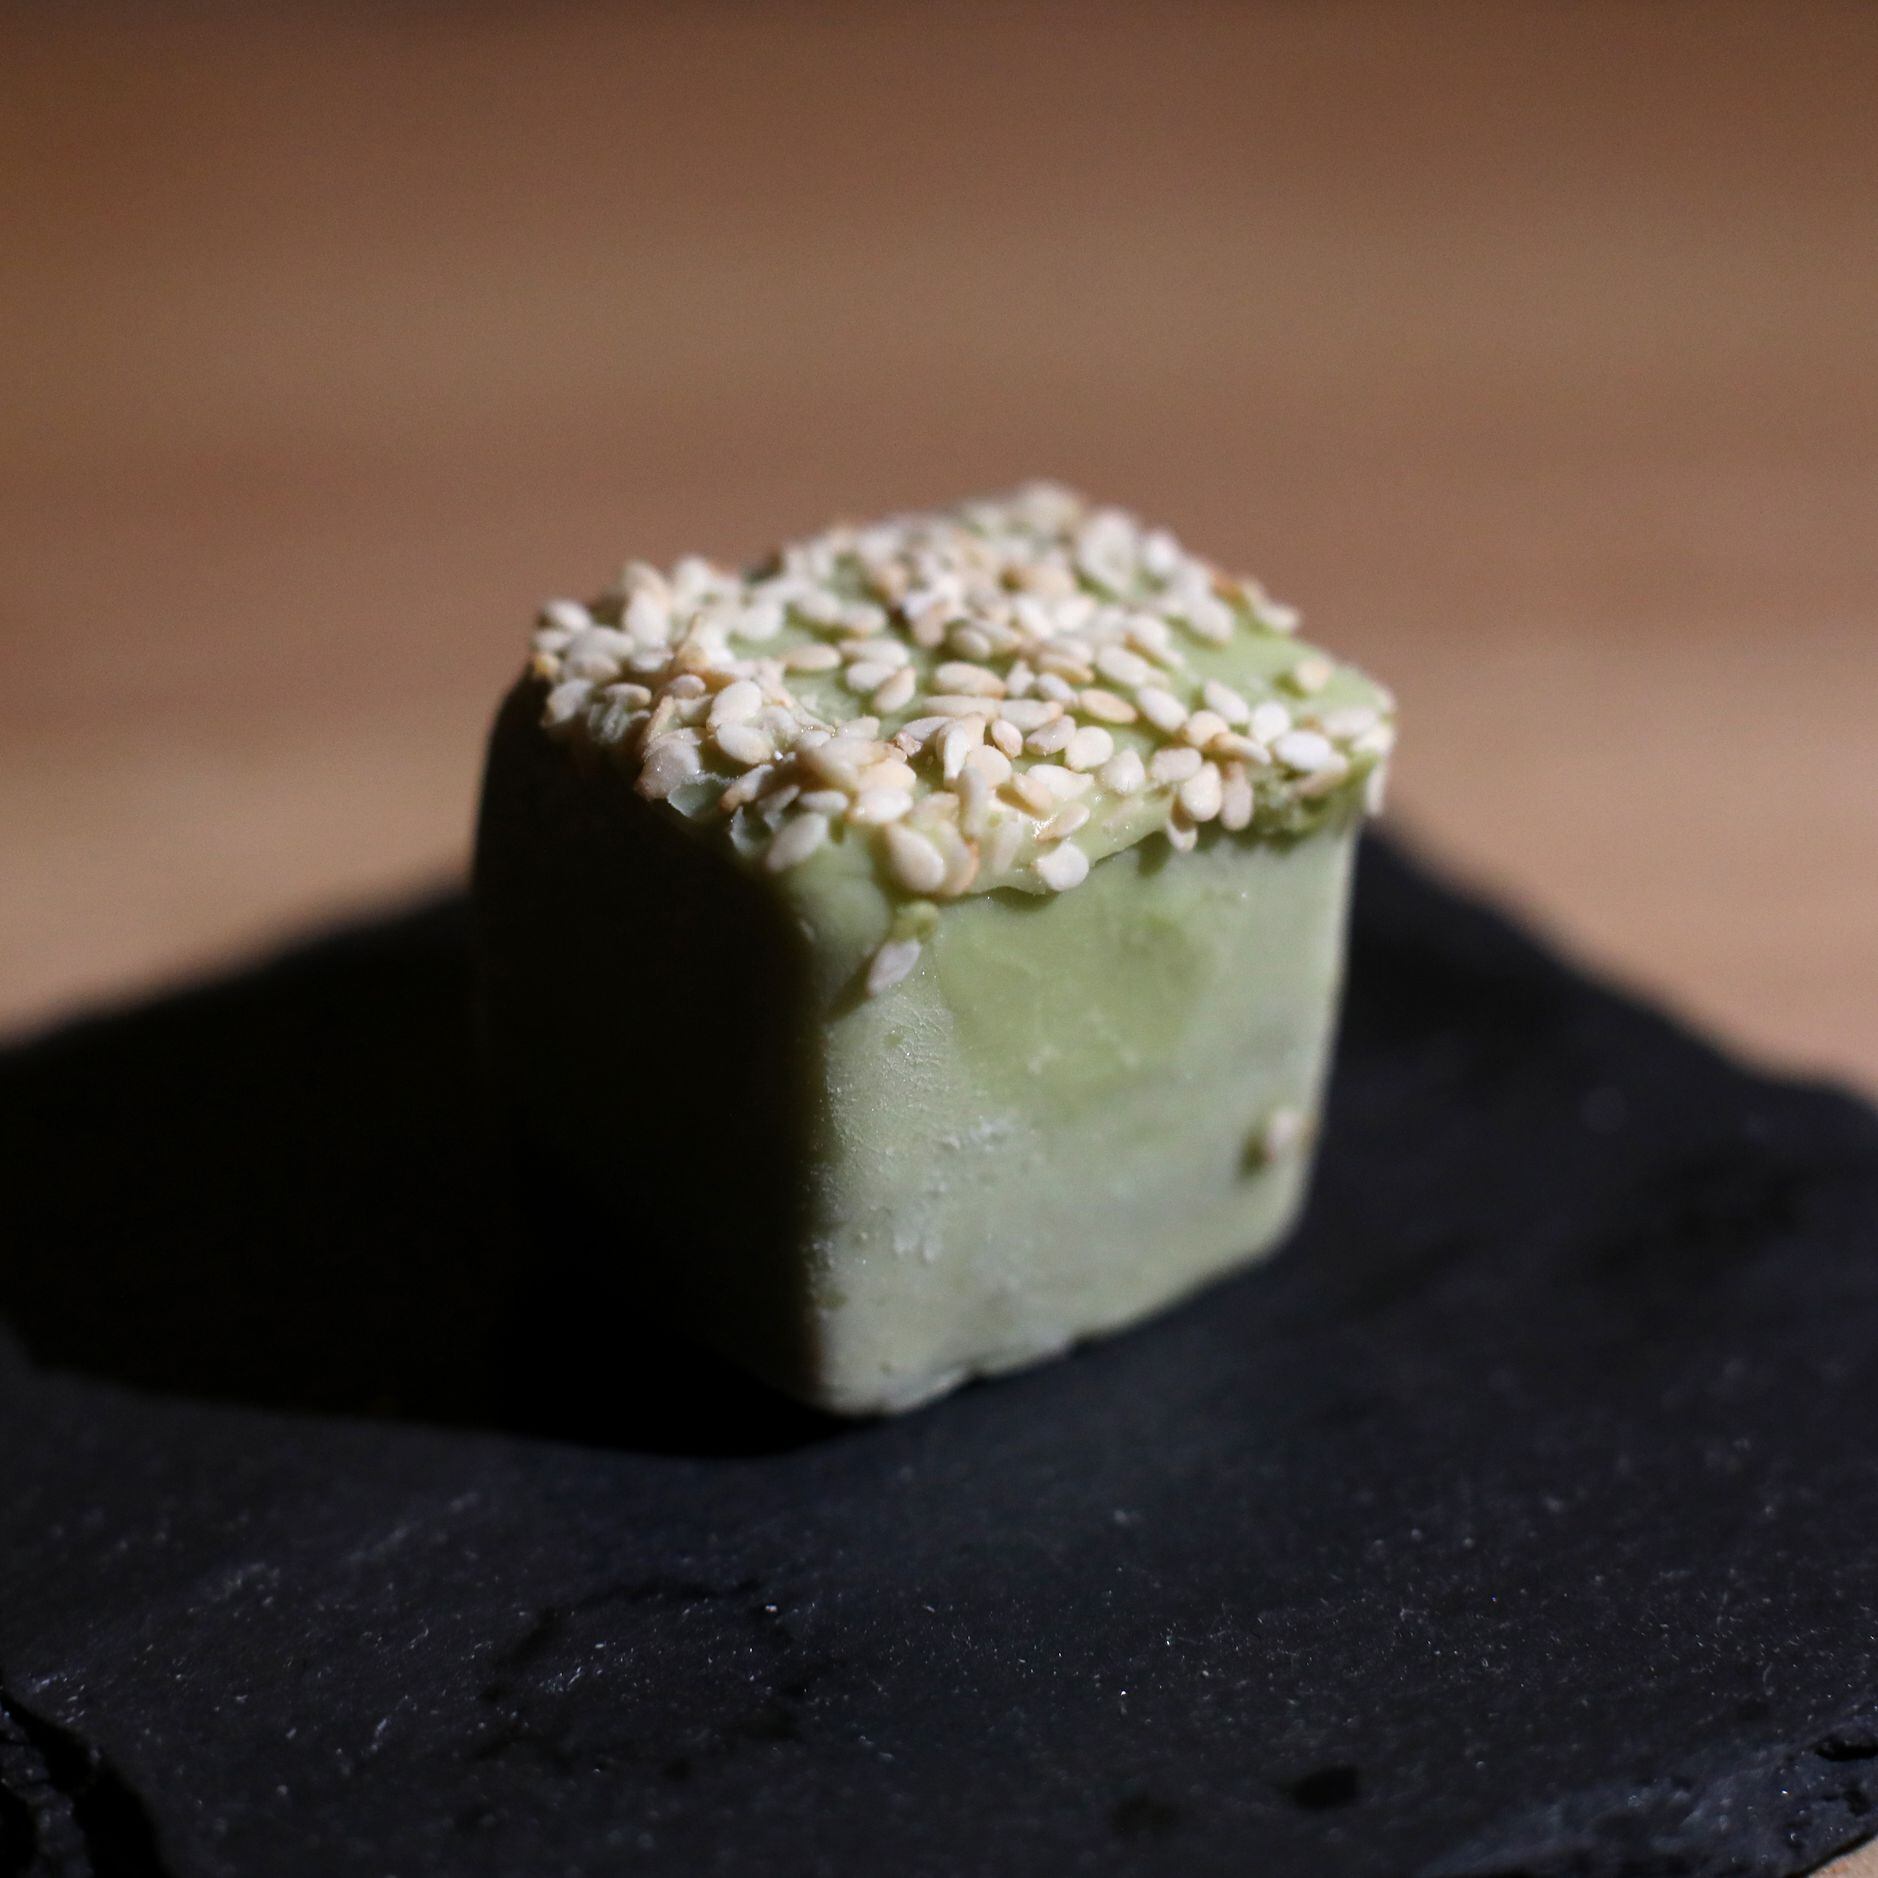 The Green Tea Dessert at Sushi By Scratch, a secret pop-up restaurant on the eighth floor of...